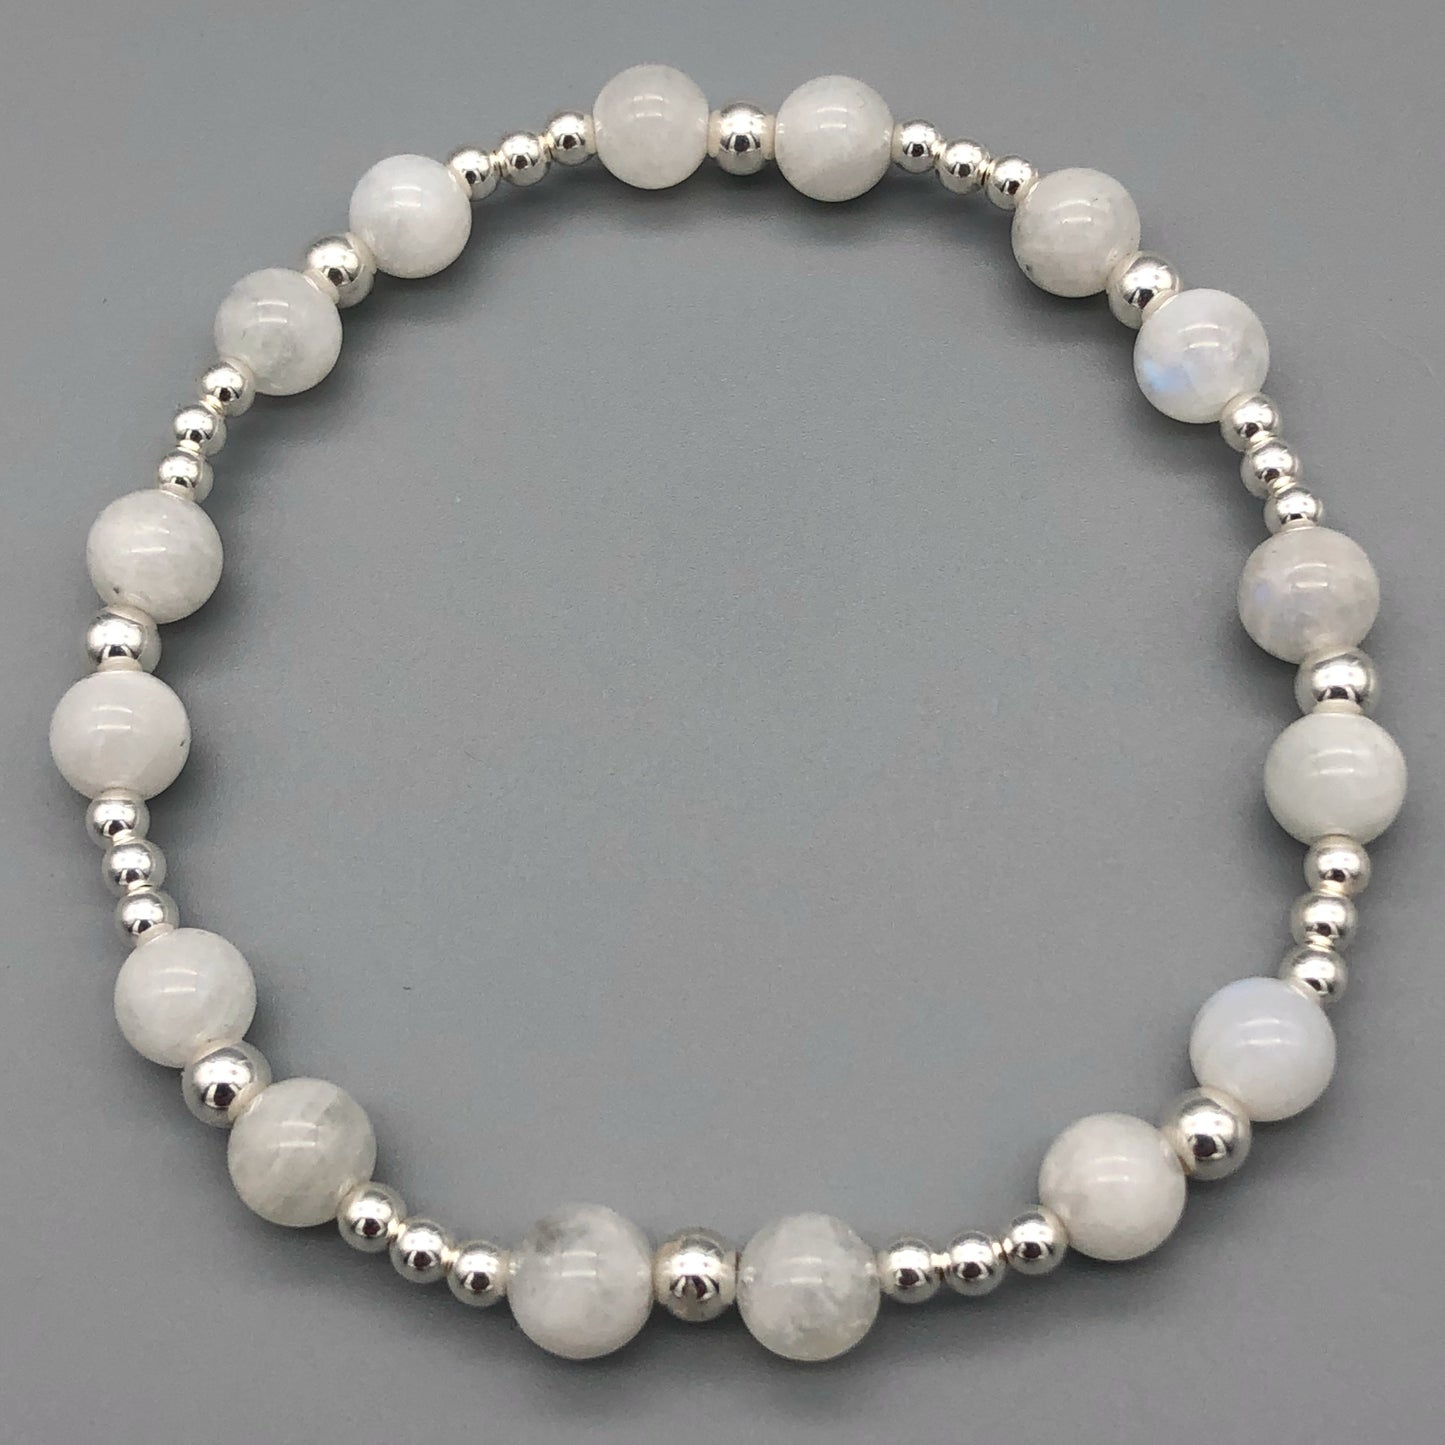 Moonstone crystal and sterling silver women's stacking bracelet by My Silver Wish